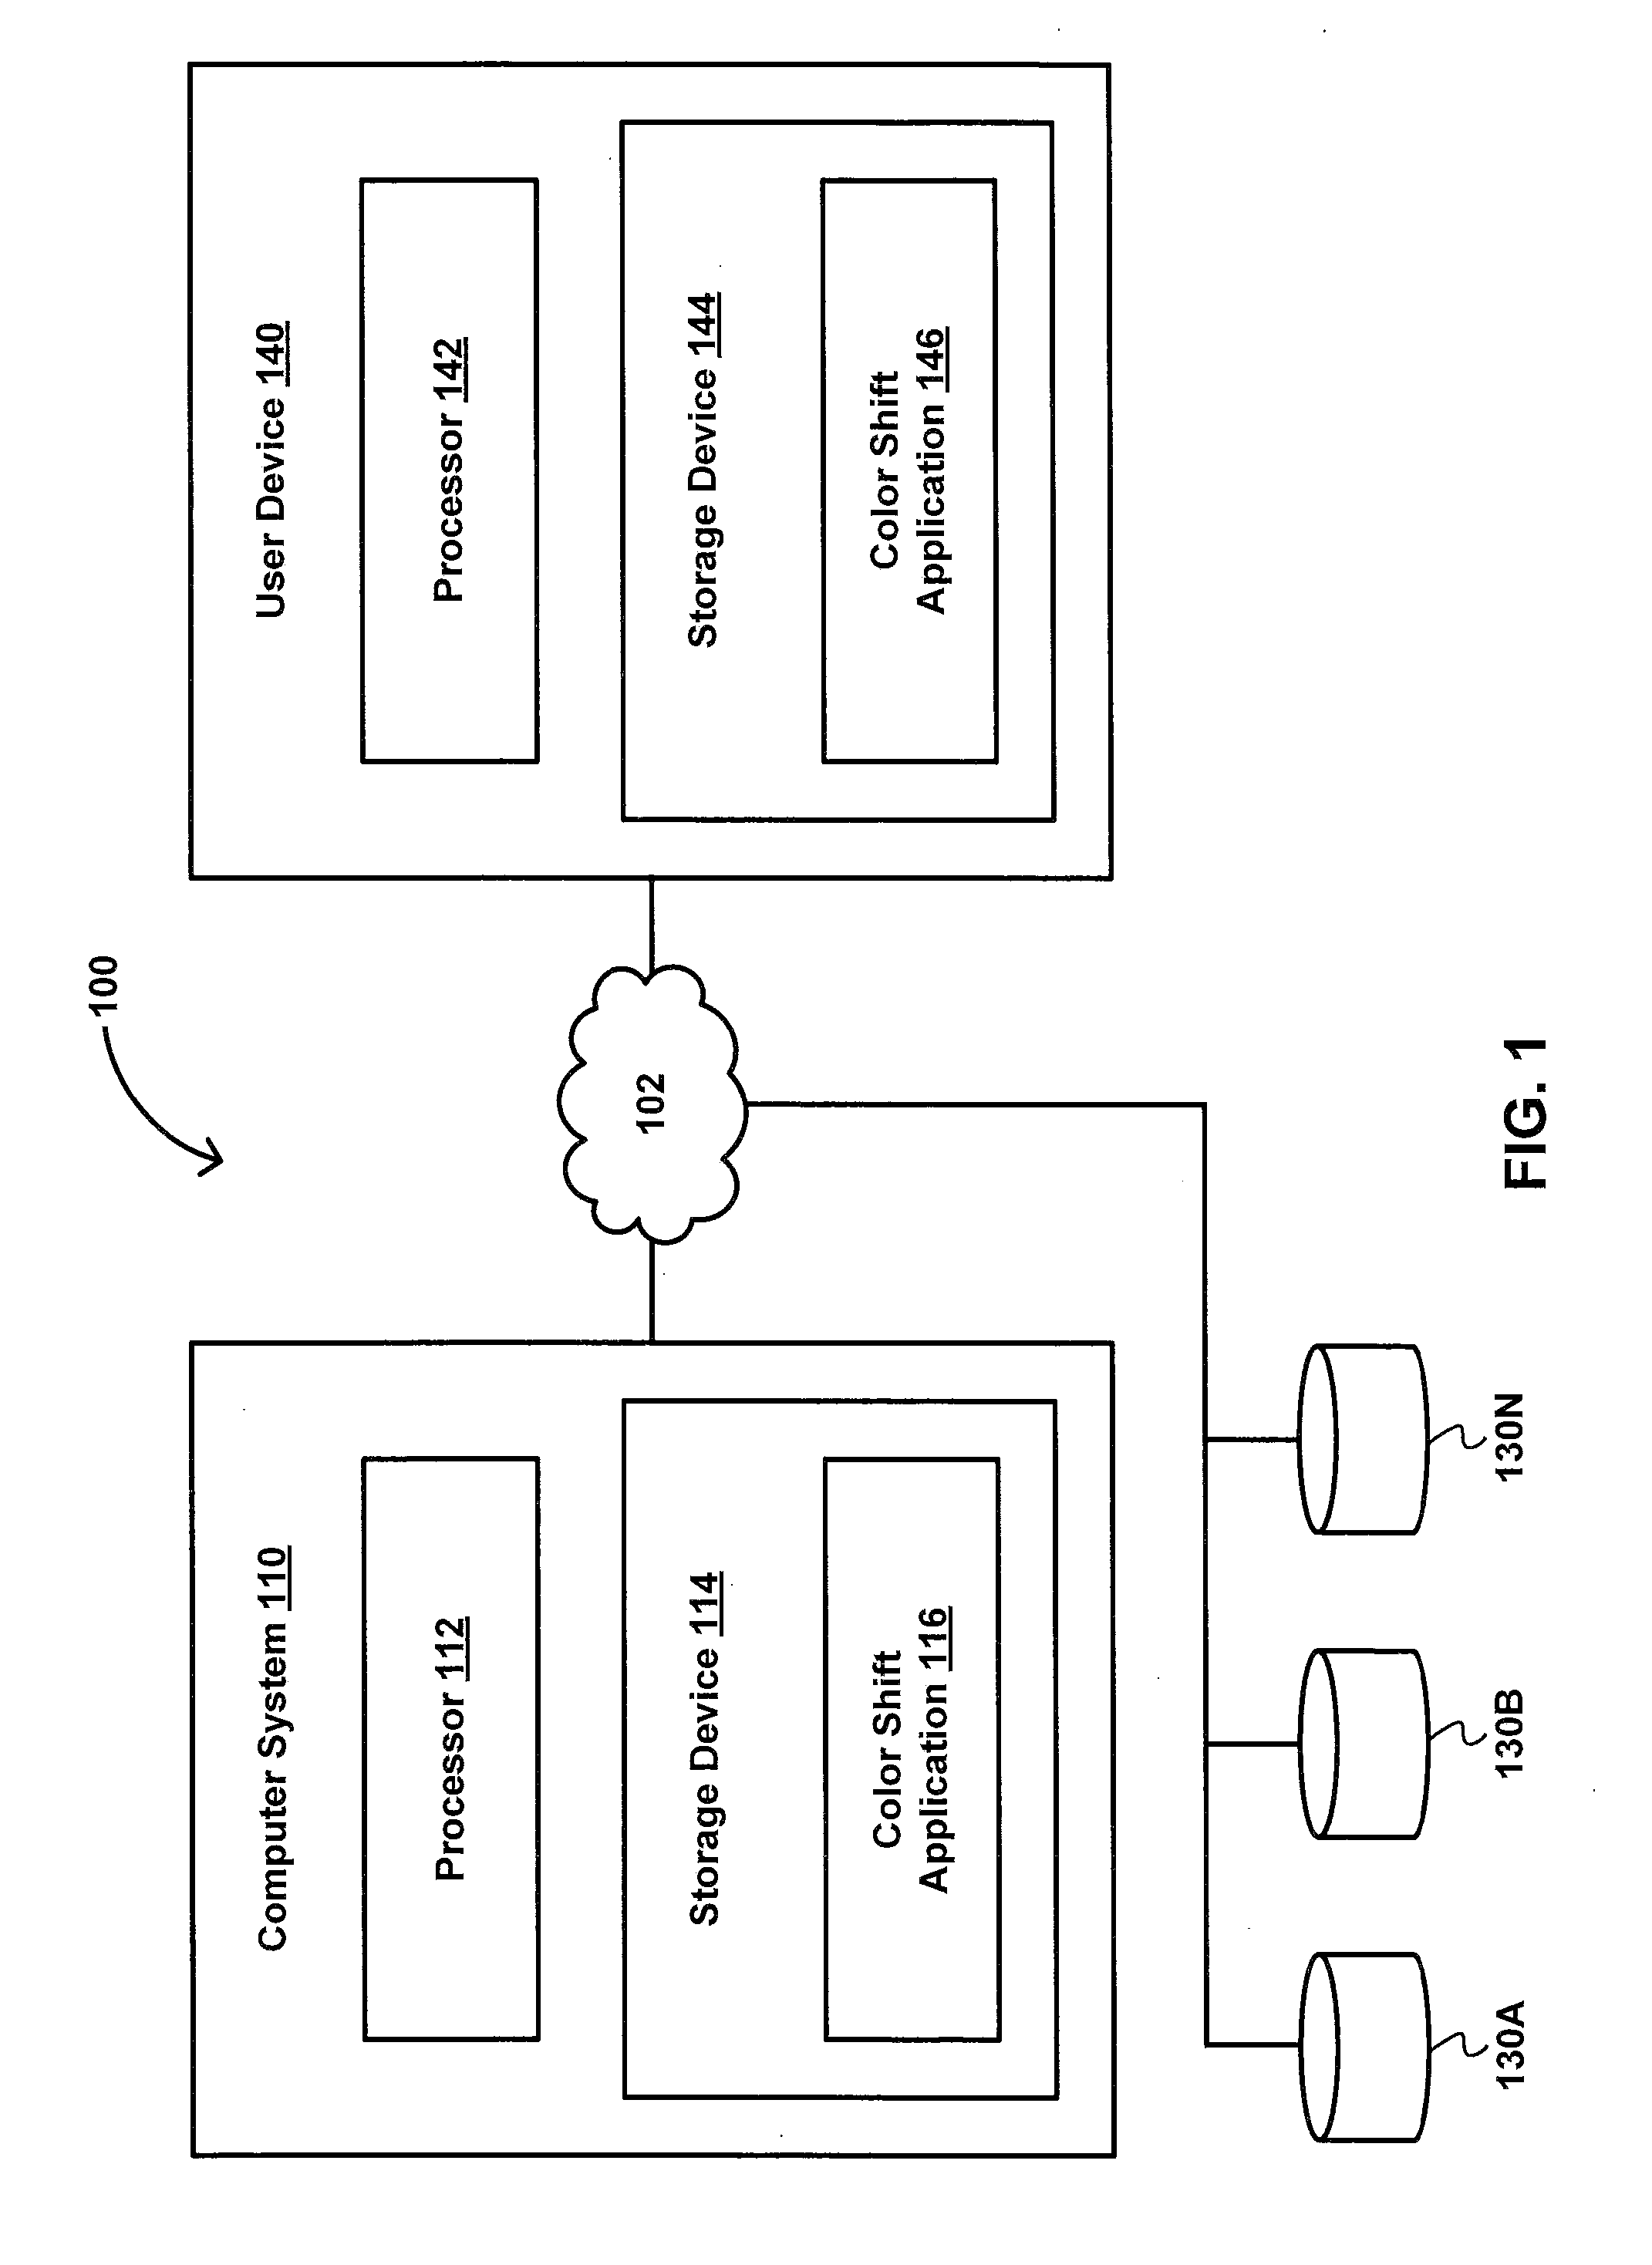 System and Method of Adjusting the Color of Image Objects Based on Chained Reference Points, Gradient Characterization, and Pre-stored Indicators of Environmental Lighting Conditions